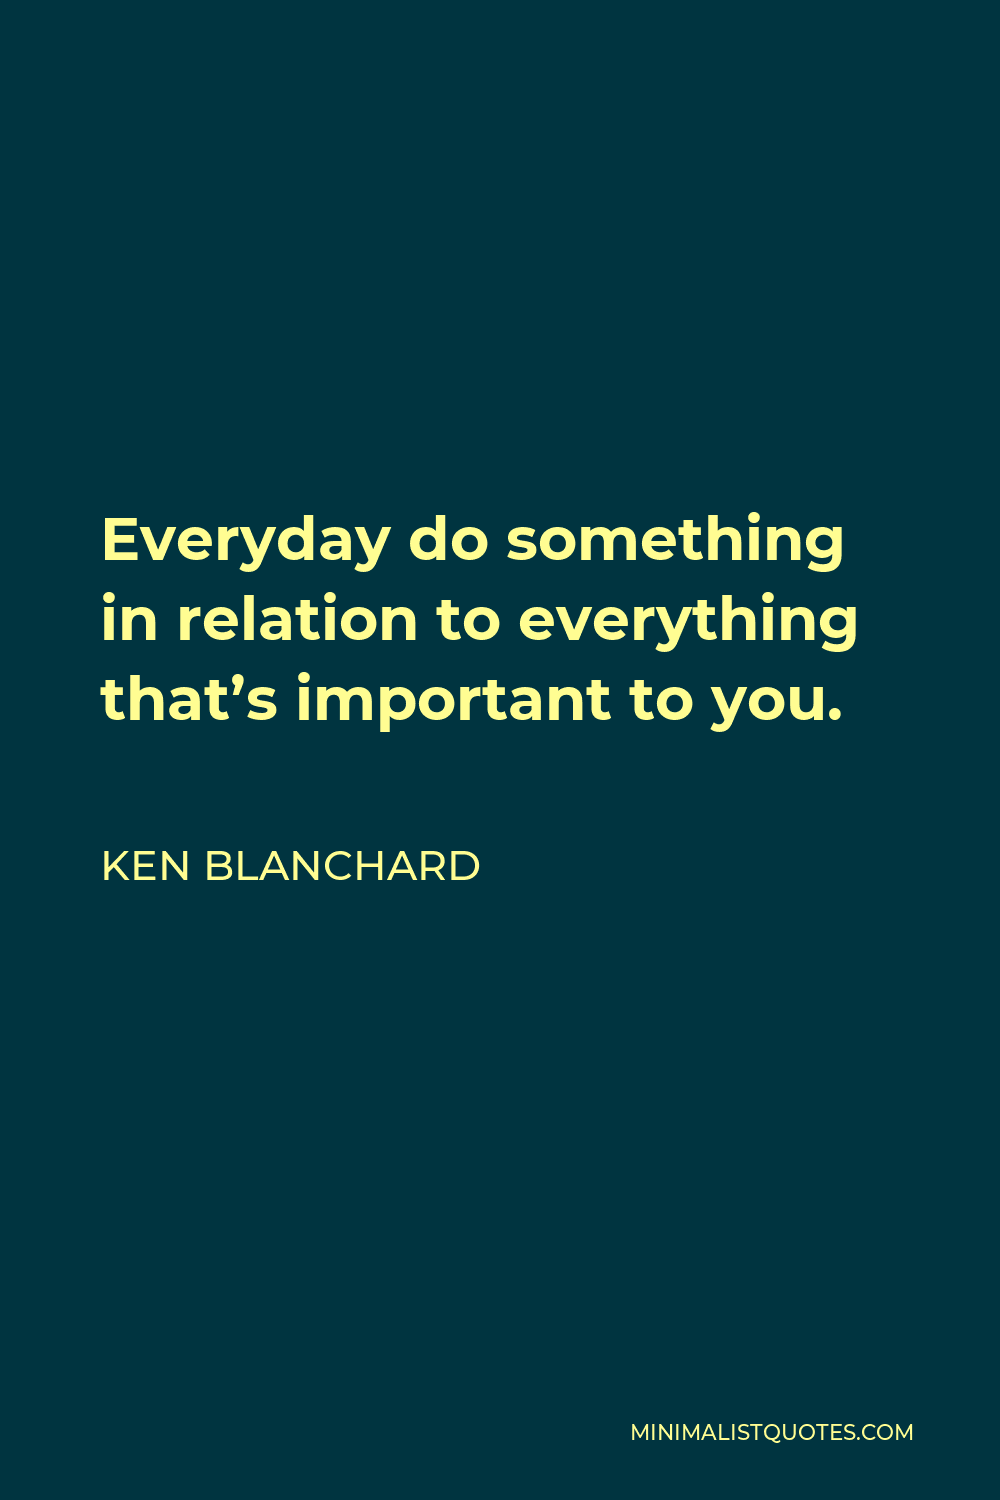 Ken Blanchard Quote - Everyday do something in relation to everything that’s important to you.